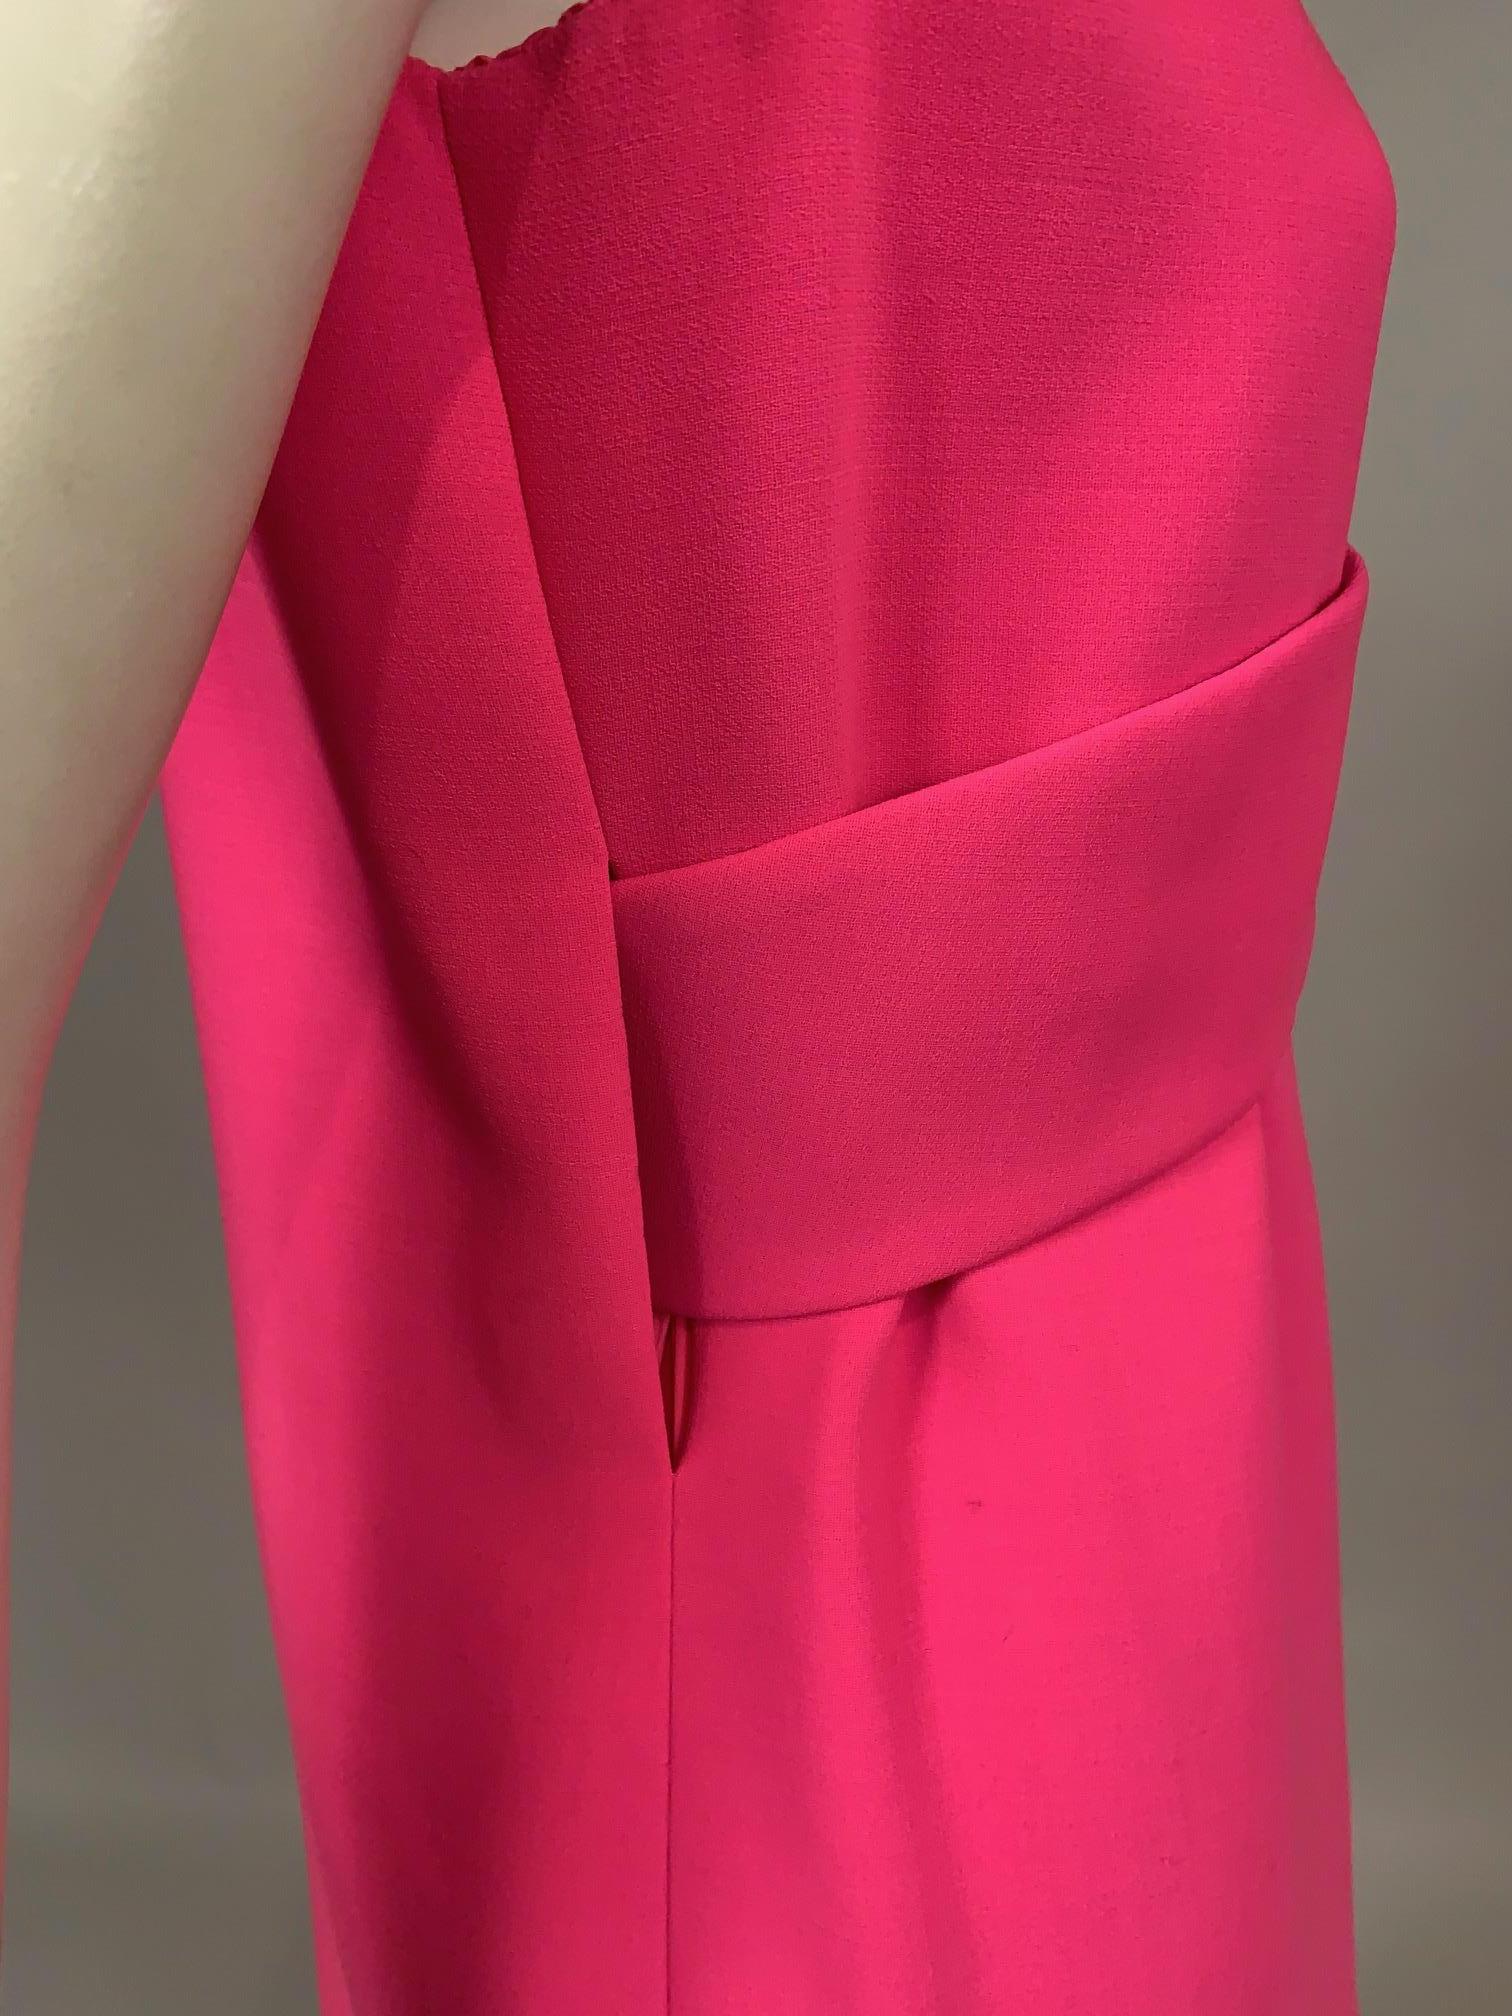 Norman Norell 1960's Classic Hot Pink Wolle Crepe Abendkleid mit Empire-Taille Damen